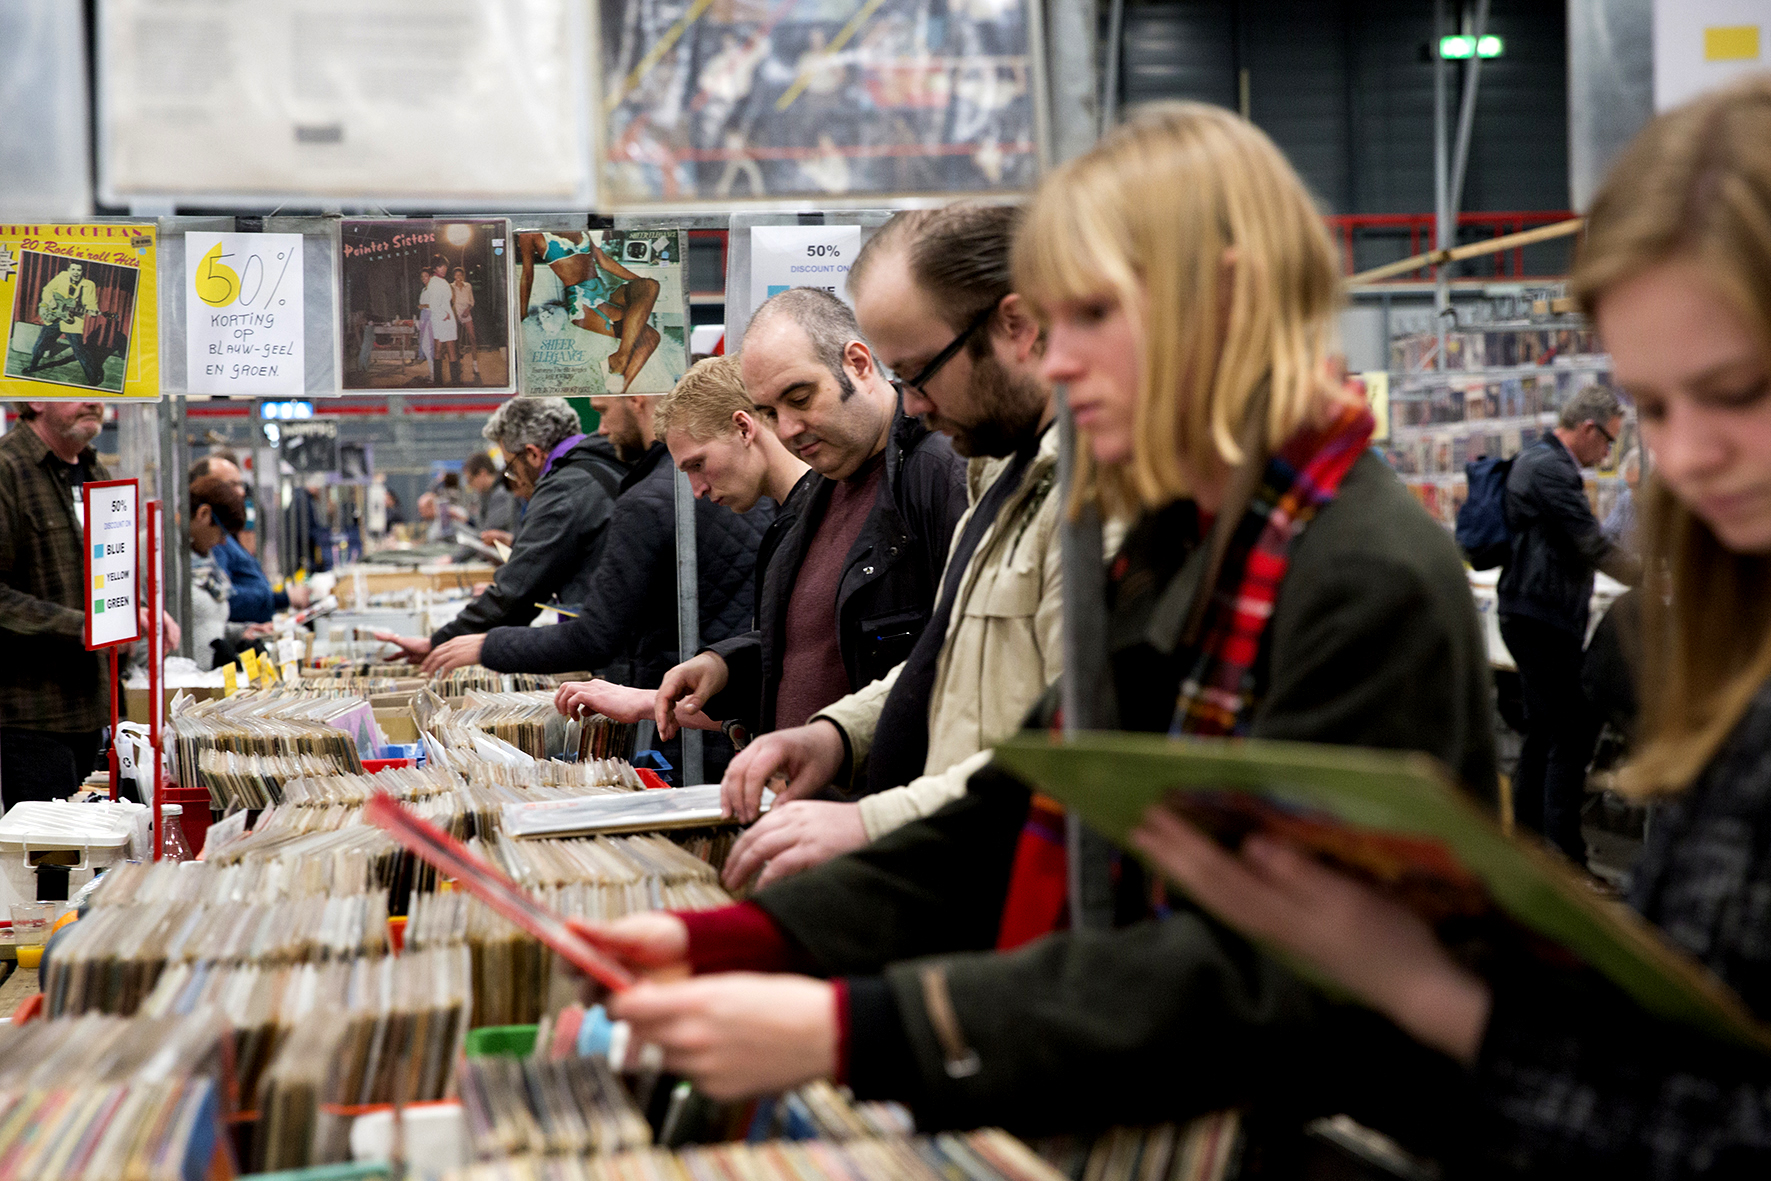 LGW21 to coincide with Mega Record & CD Fair, Europe's biggest record fair, 13 & 14 November in Utrecht